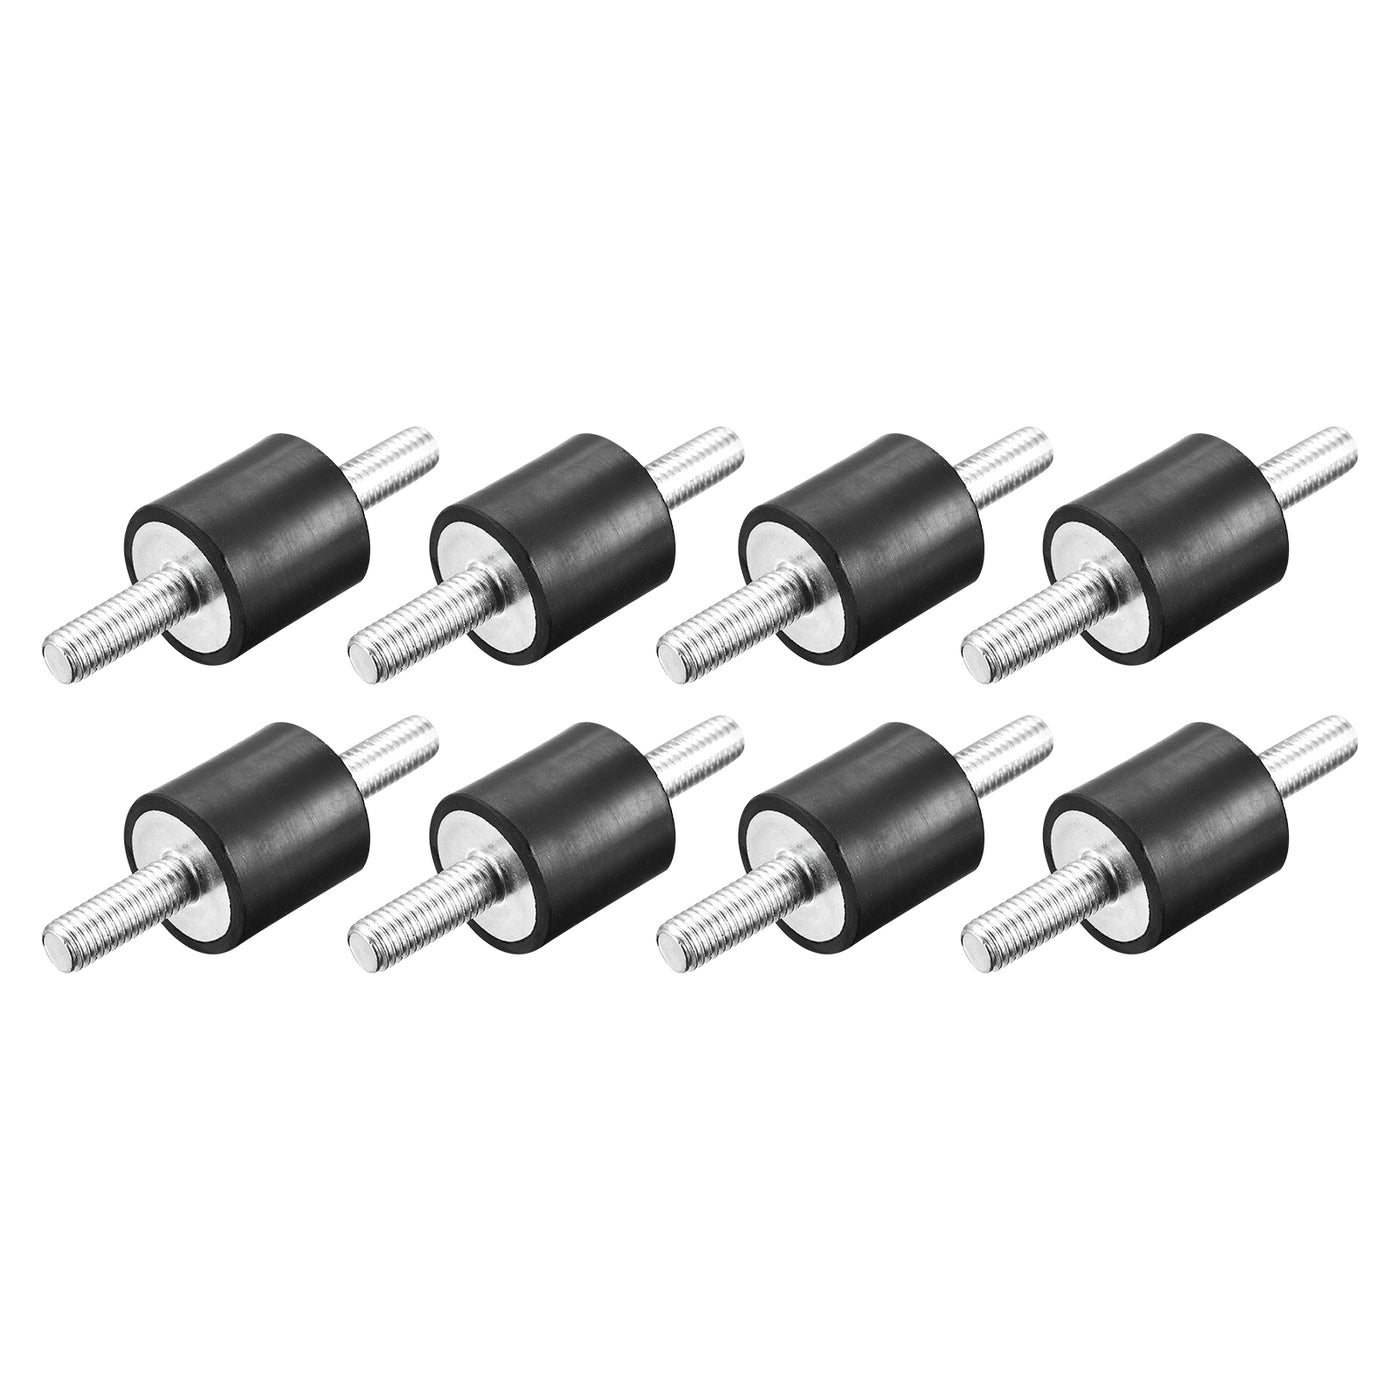 uxcell Uxcell Rubber Mounts 8pcs M8x23mm Male Vibration Isolator Shock Absorber D25mmxH25mm